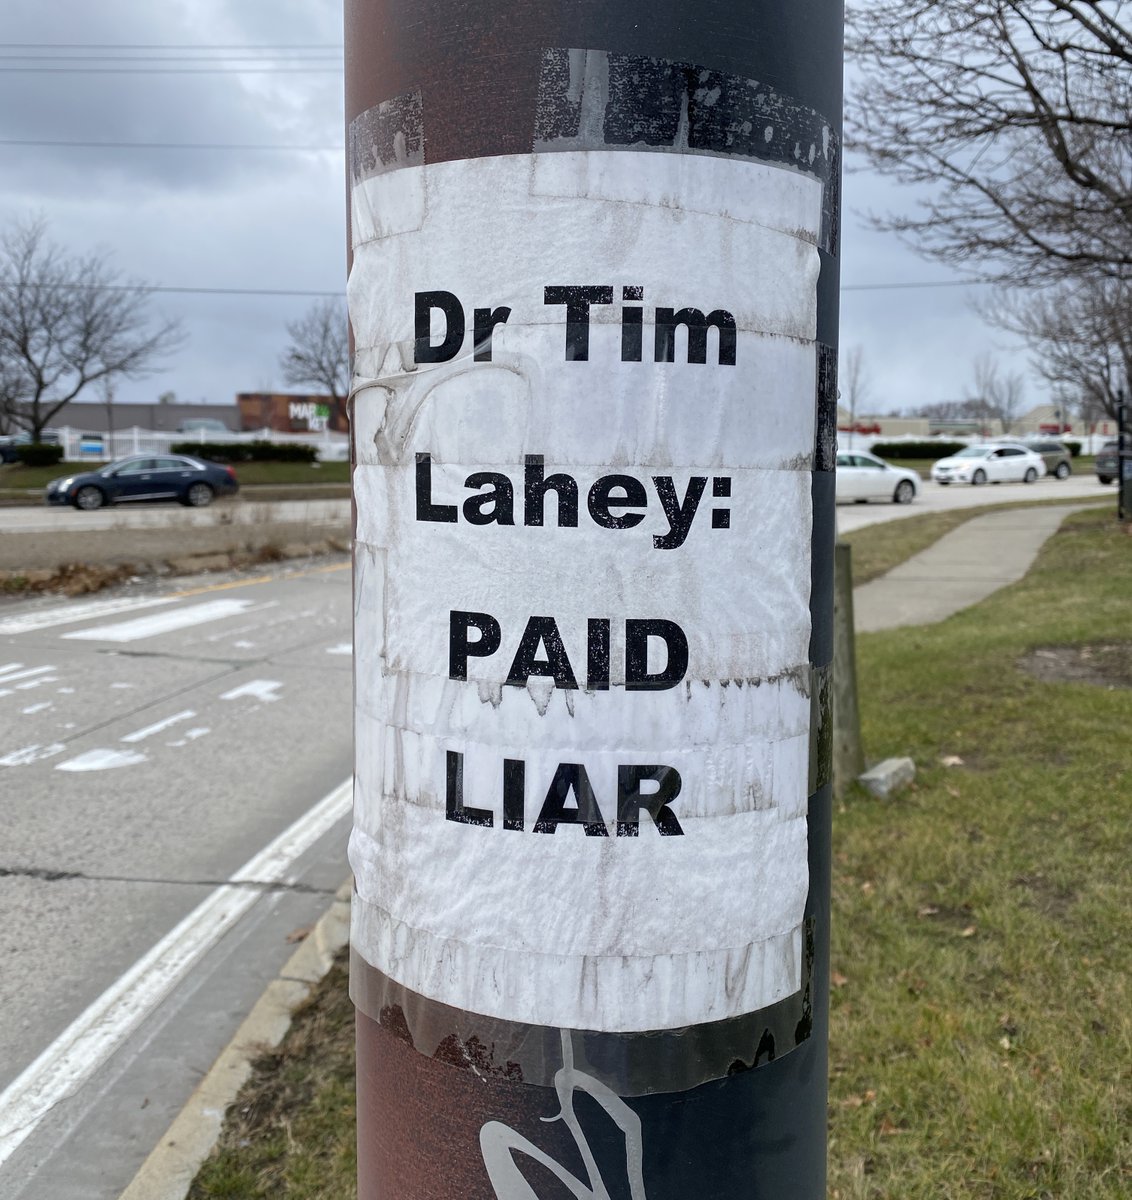 He took a pay cut to ensure *all* workers get paid during this time of decreased - yes DECREASED - hospital revenue. So when I had to spend my day locating & removing these signs, I lost it. There I was, angry-crying on the shoulder of a highway off ramp.2/3